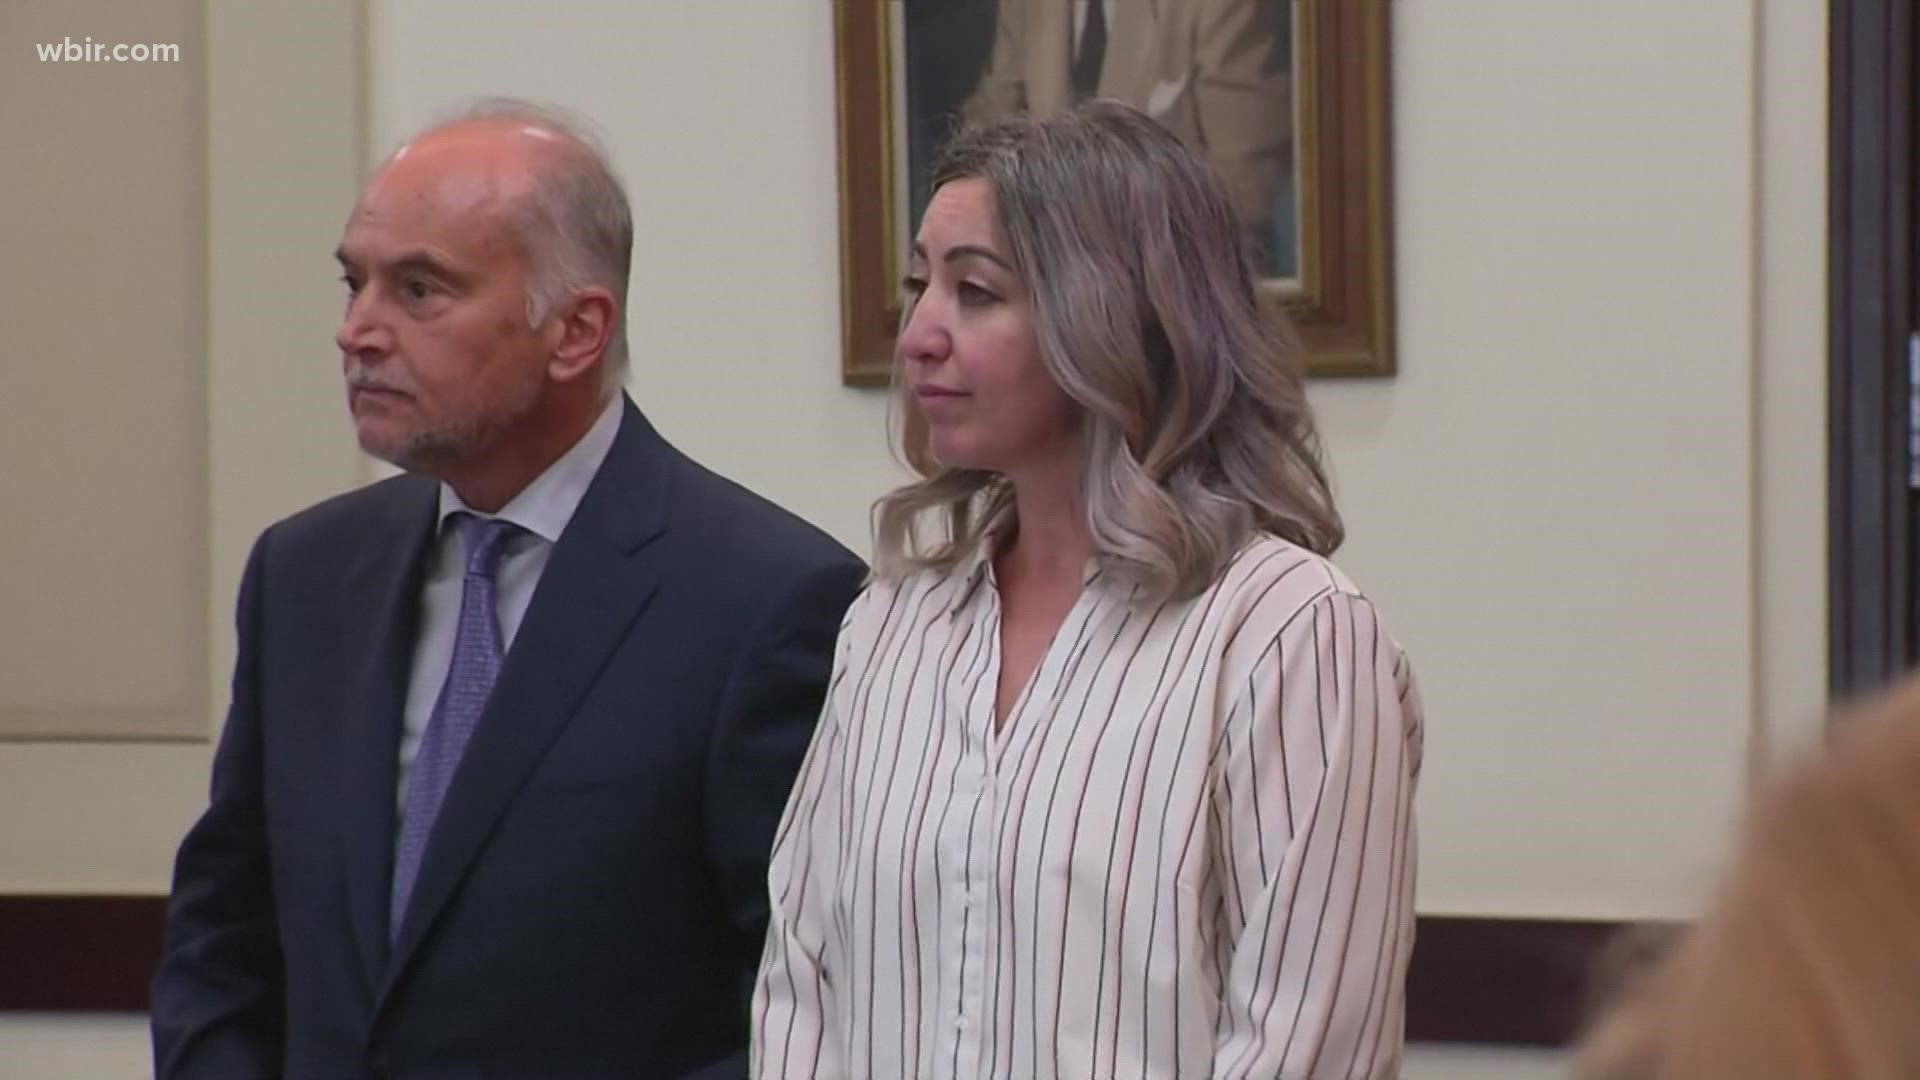 A jury found RaDonda Vaught guilty of criminally negligent homicide after she gave a 74-year-old patient a fatal dose of the wrong medication back in 2017.